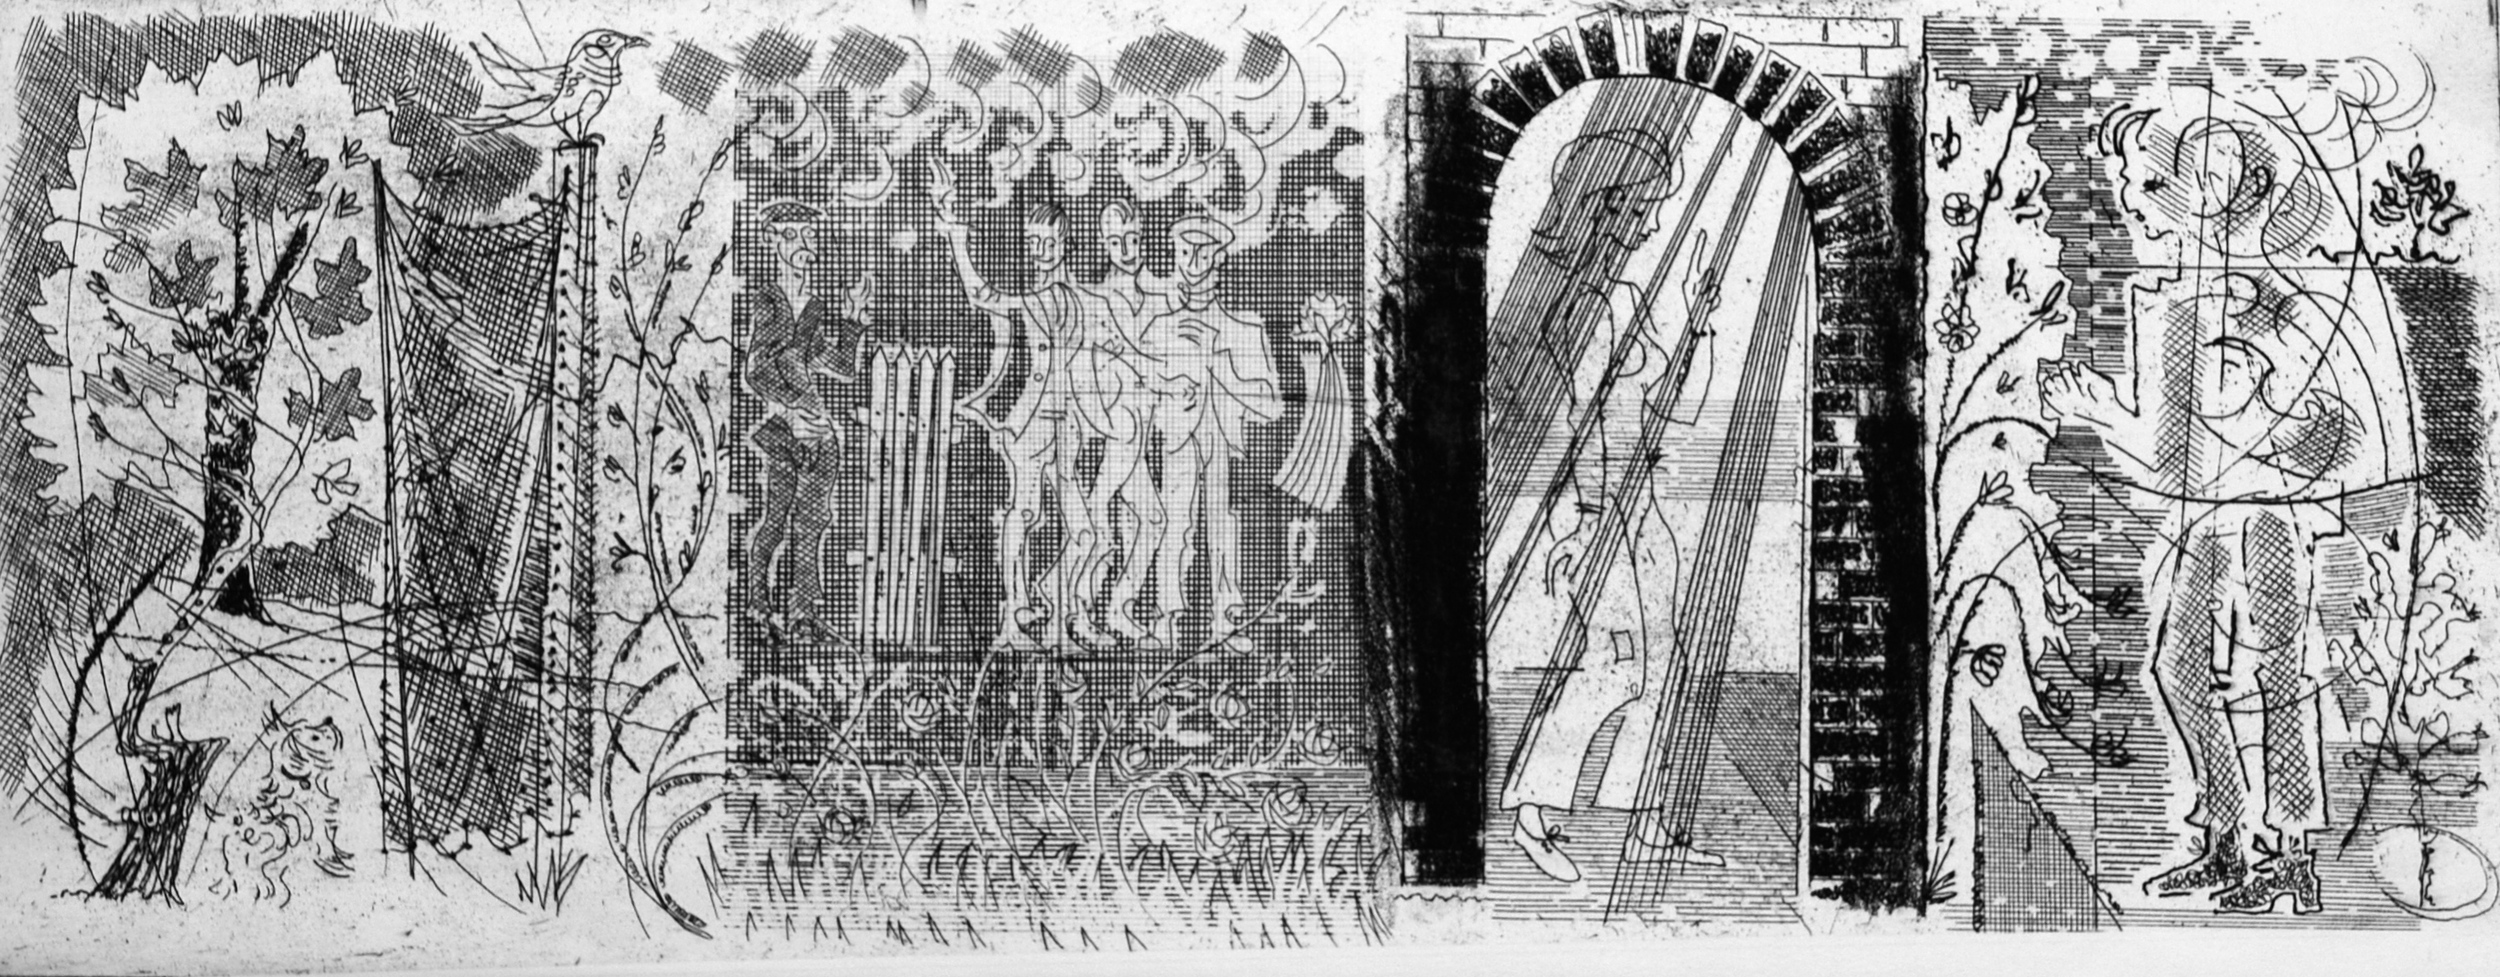  Frieze of Figures, late 1980s Etching &nbsp;50 x 20 cm 